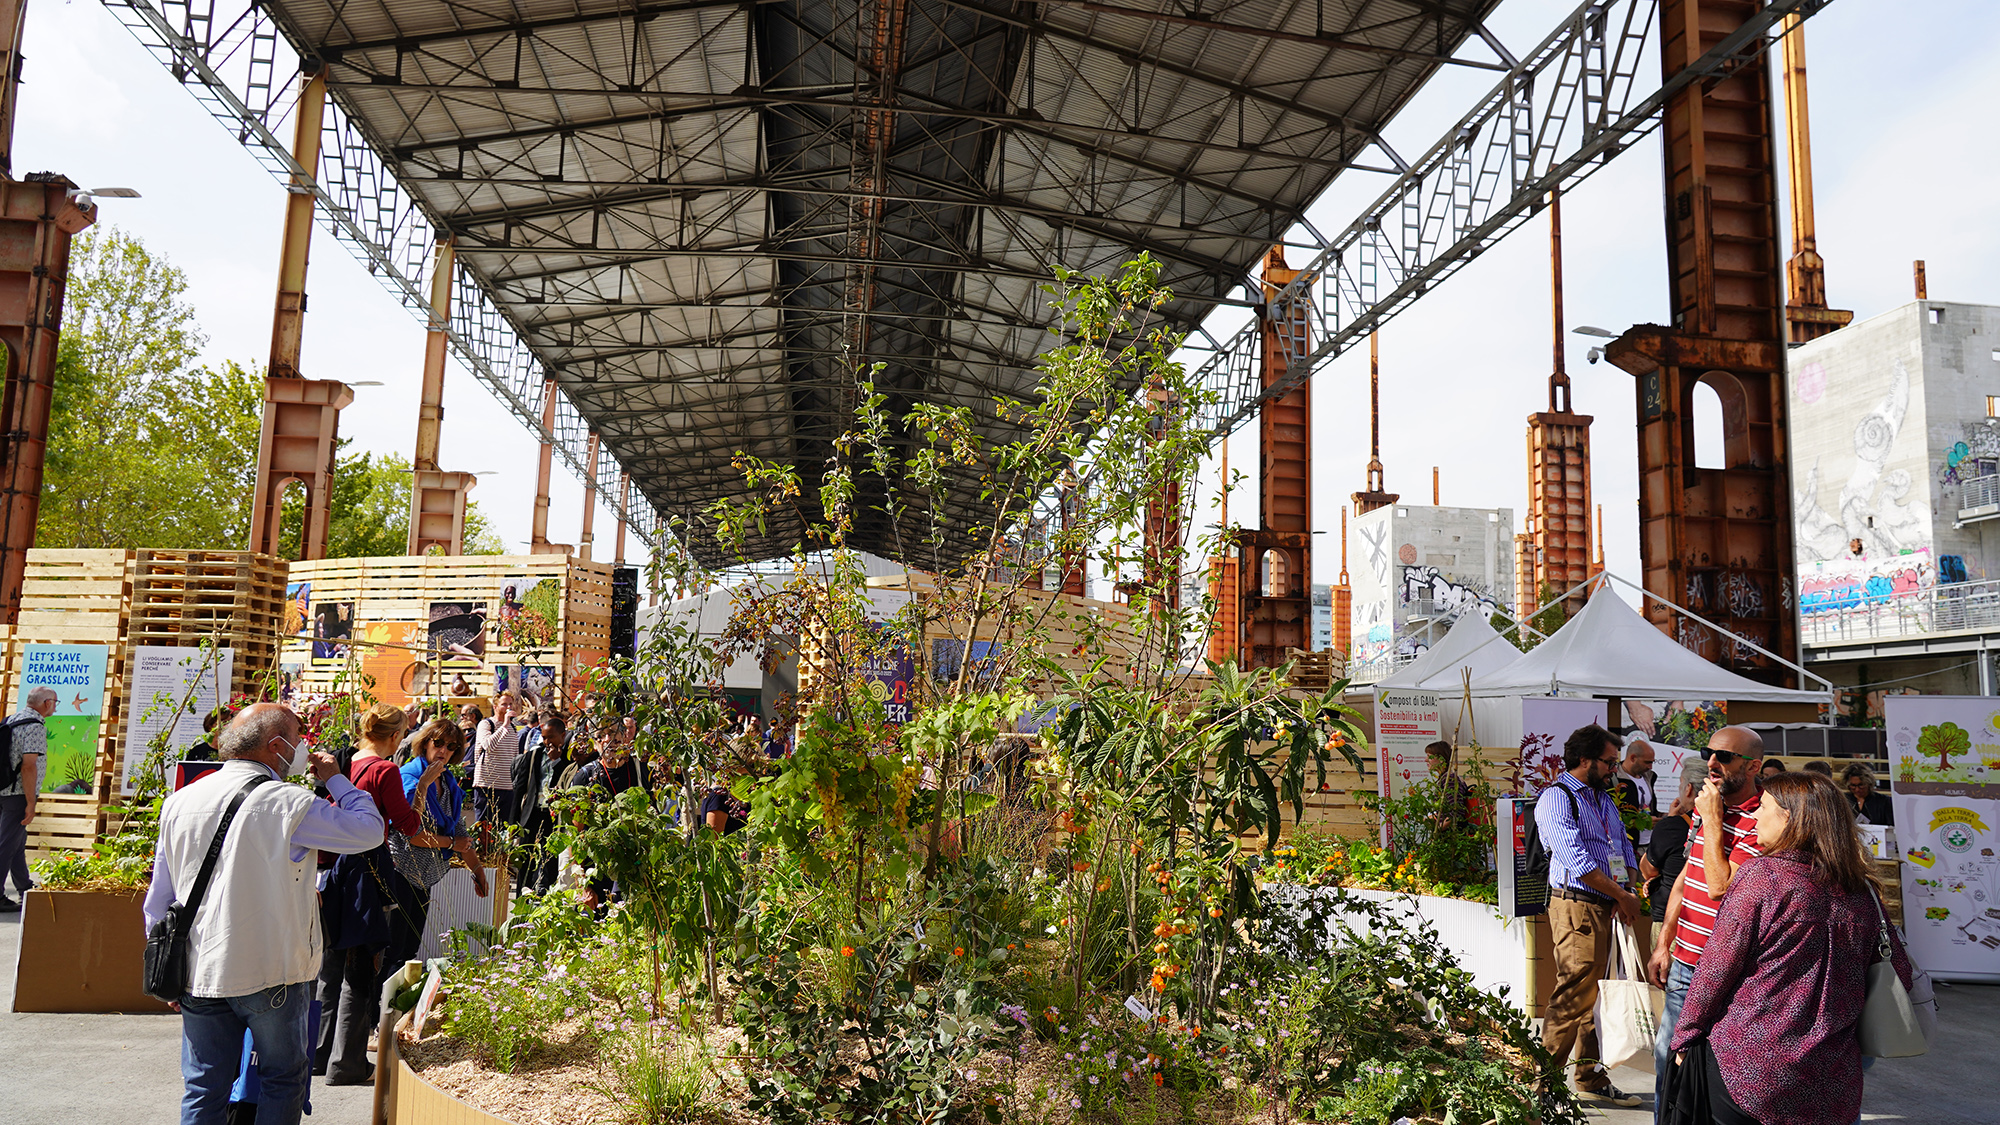 Terra Madre Salone del Gusto is back in Turin and in Piedmont